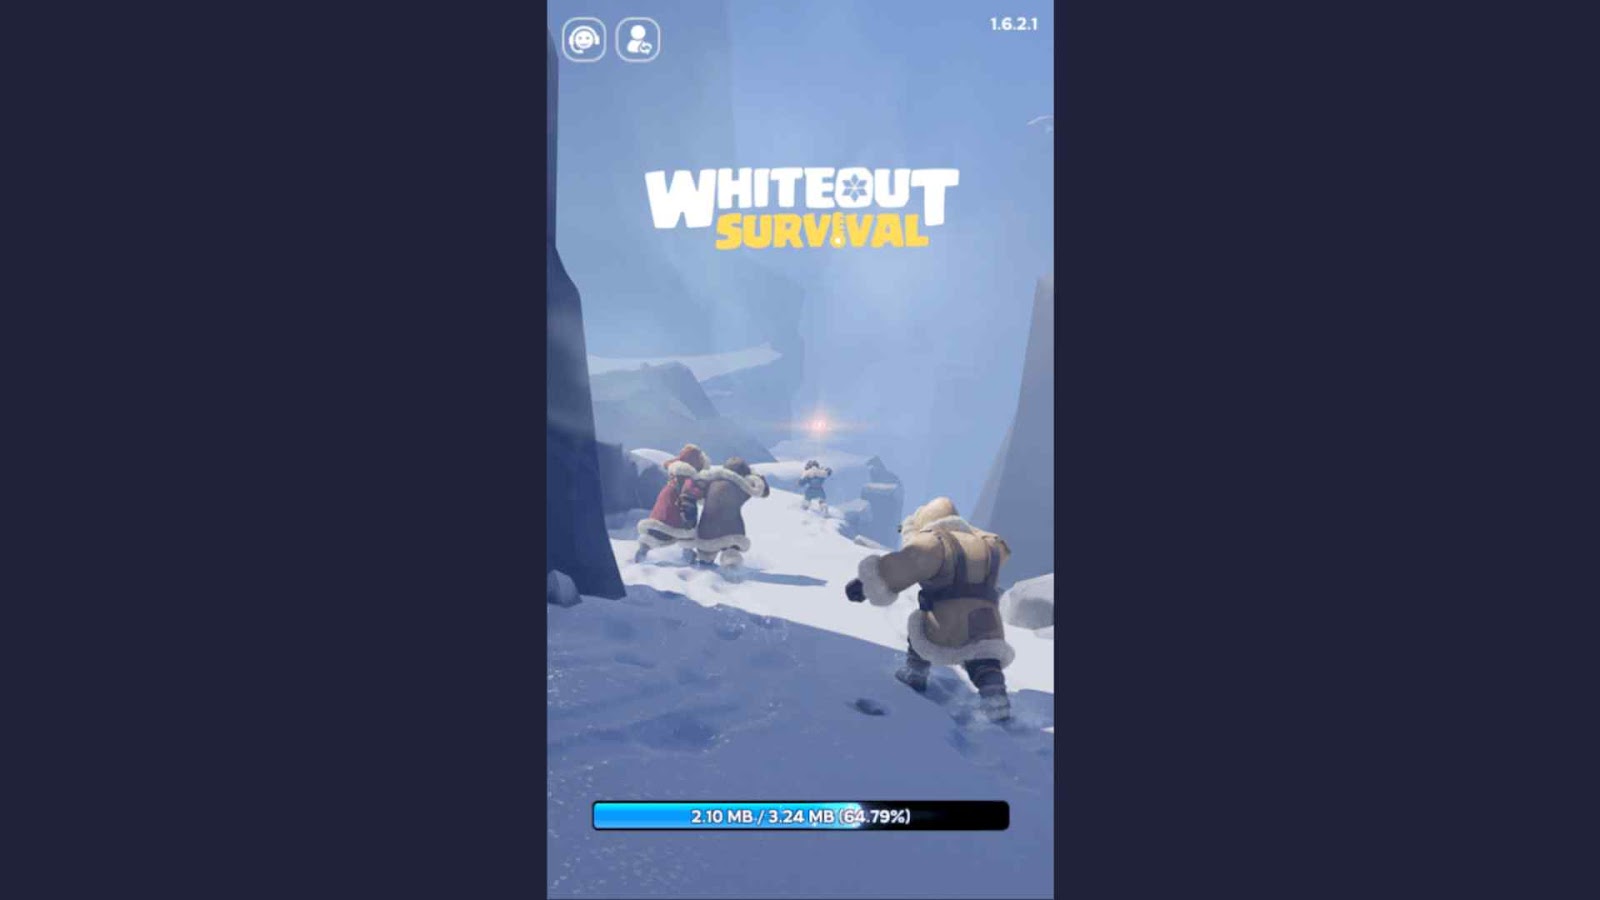 Whiteout Survival on PC